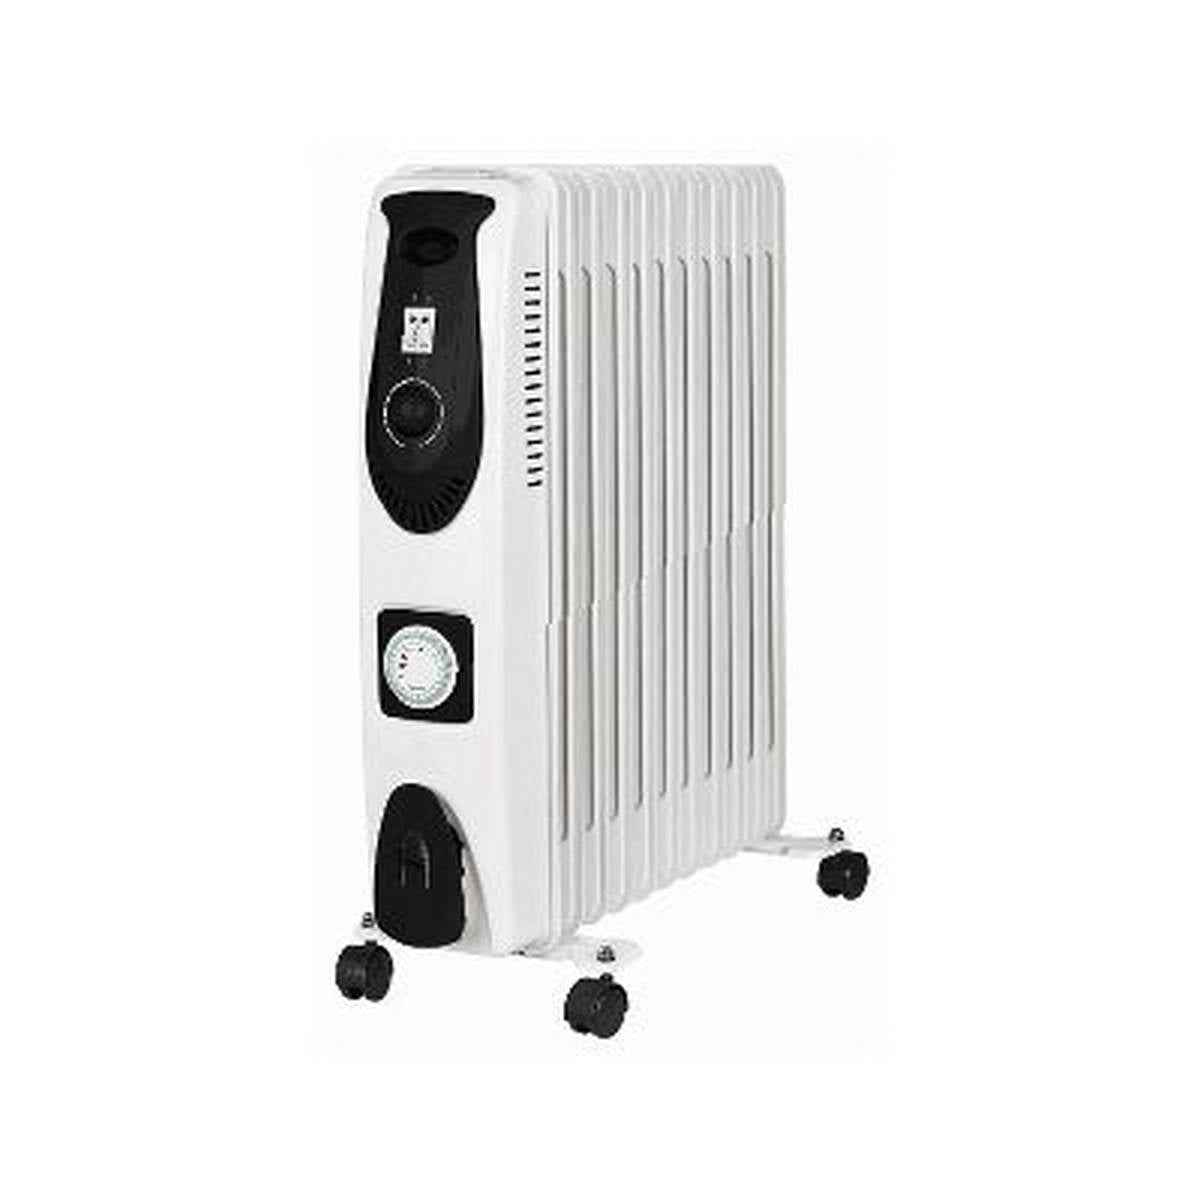 KINGAVON 2.5KW 11FIN OIL FILLED RADIATOR WITH TIMER BB-OR101